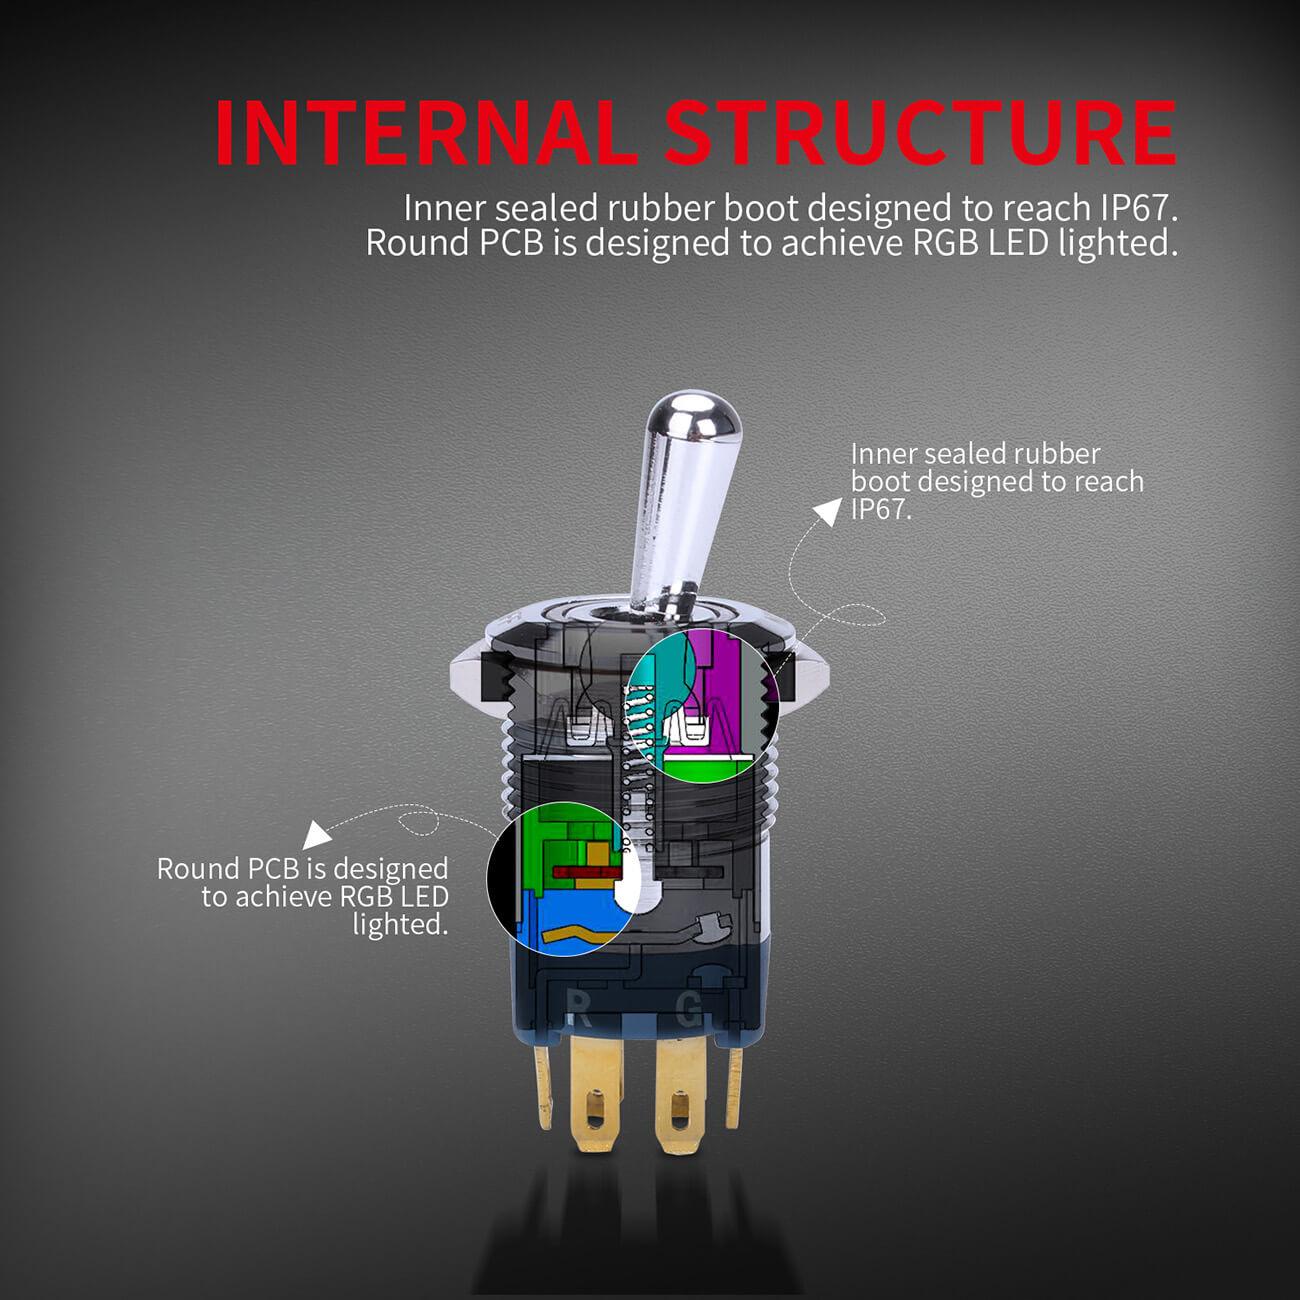 16mm SPST ON OFF 12V RGB 6 Pin Pre-Wired LEDToggle Switch internal structure